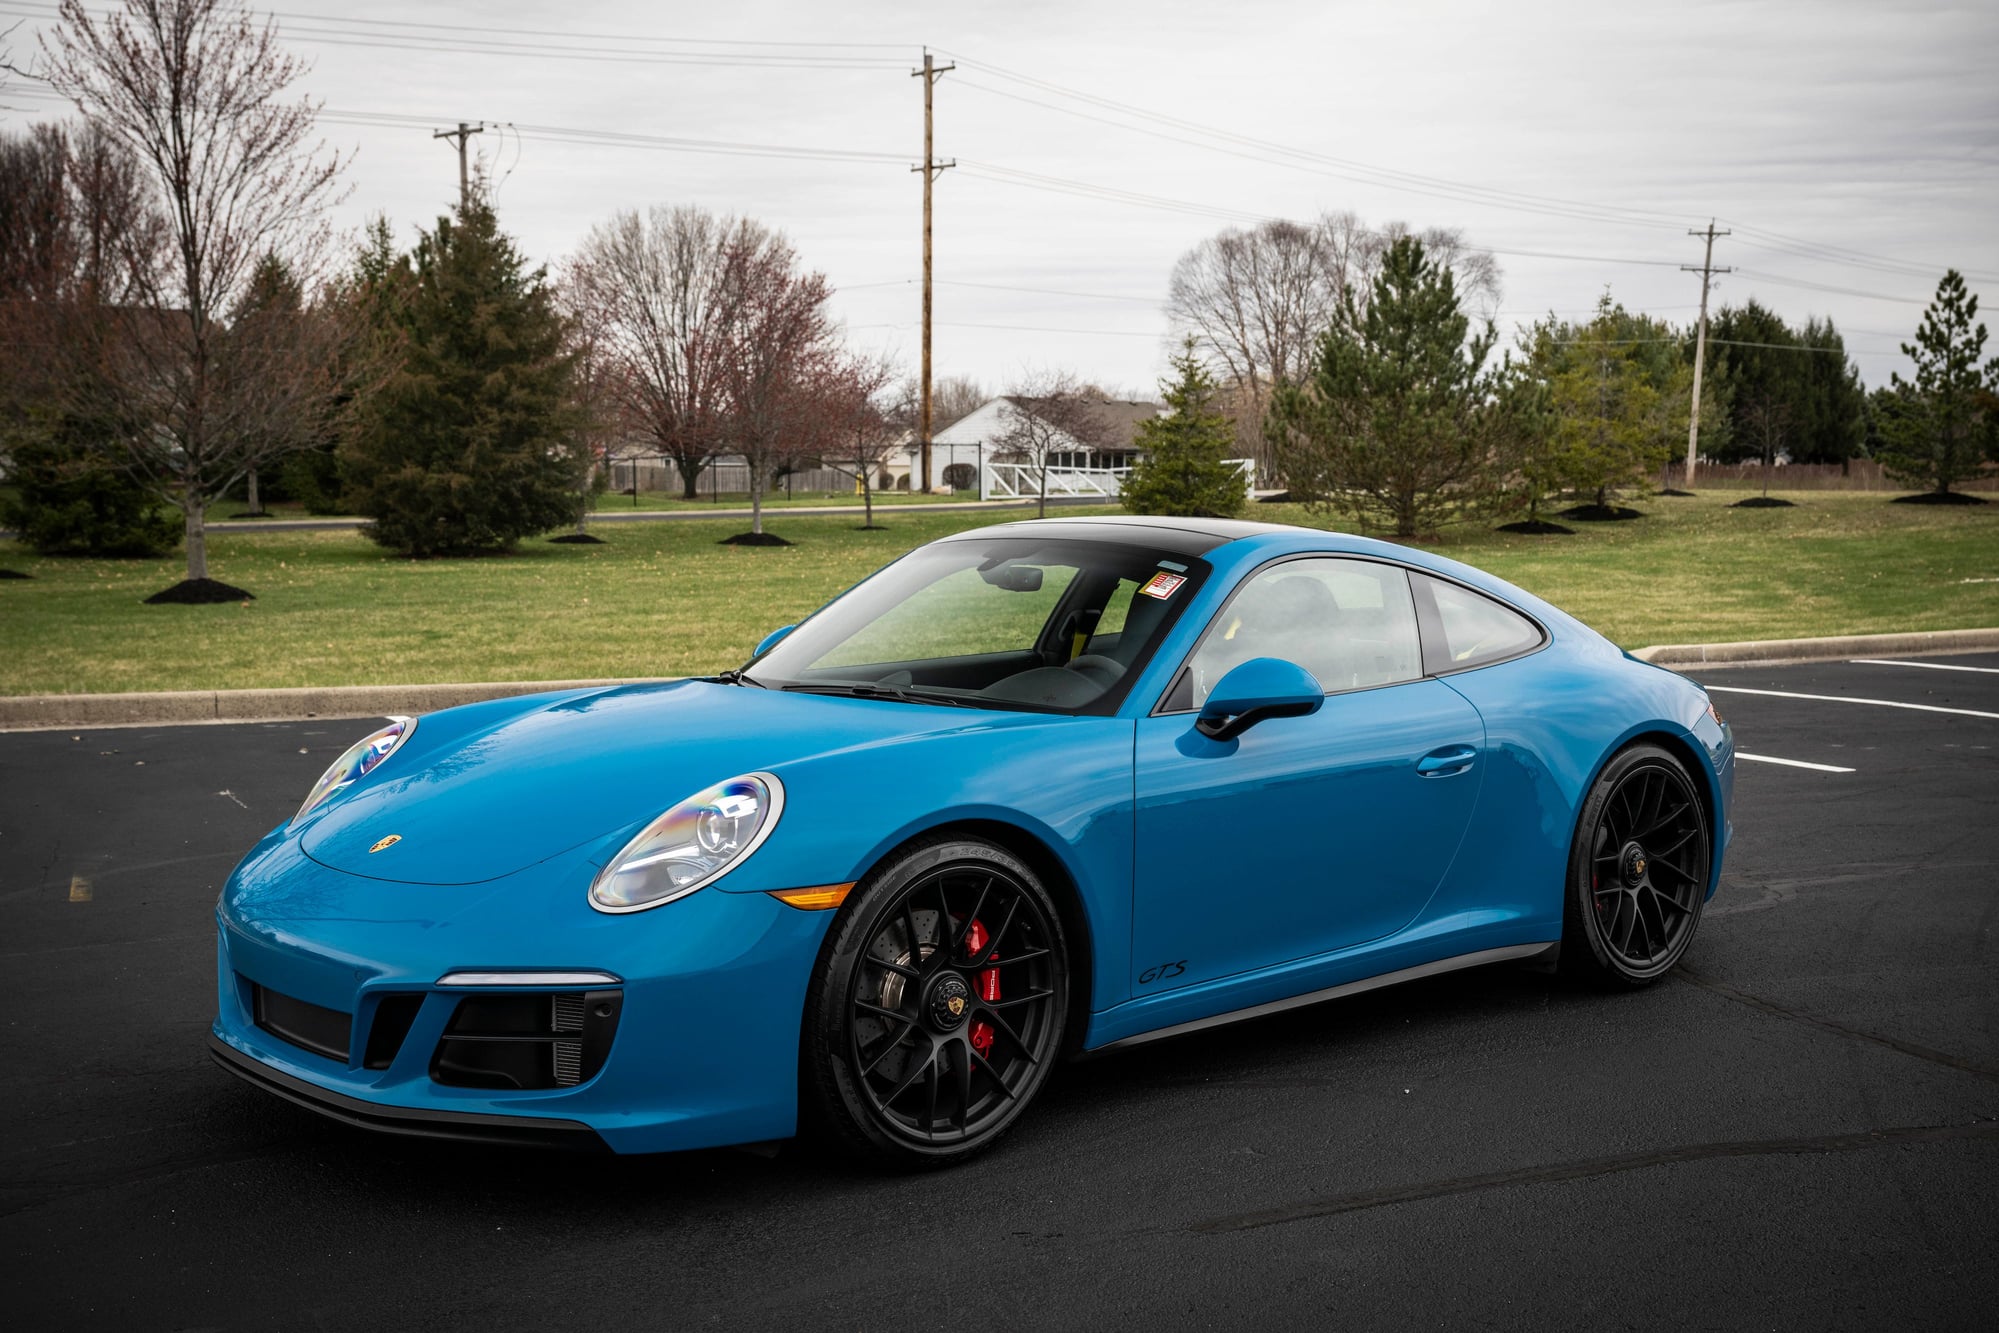 2019 Porsche 911 - 2019 Porsche 911 Carrera GTS - PTS Blue Turquoise - Used - VIN WP0AB2A95KS115188 - 10,328 Miles - 6 cyl - 2WD - Automatic - Coupe - Blue - Brownsburg, IN 46112, United States